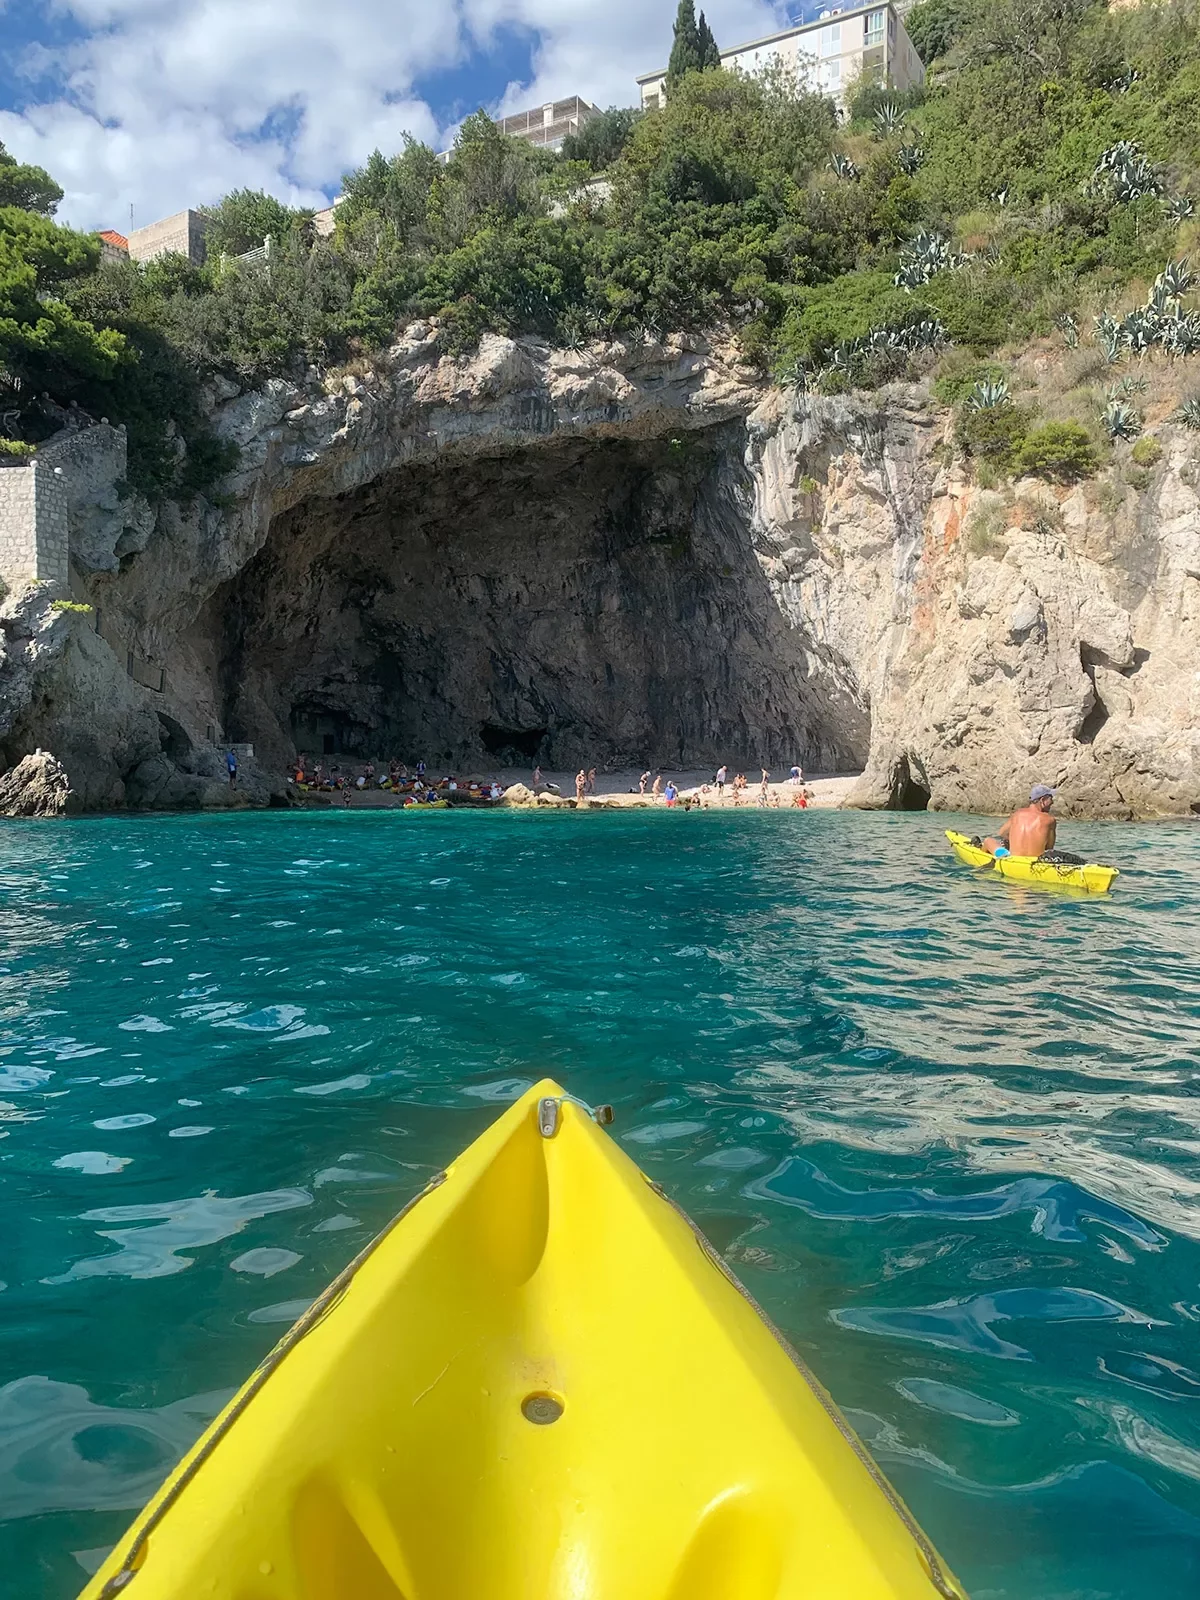 POV shot of guest kayaking, looking towards cliffside cove.